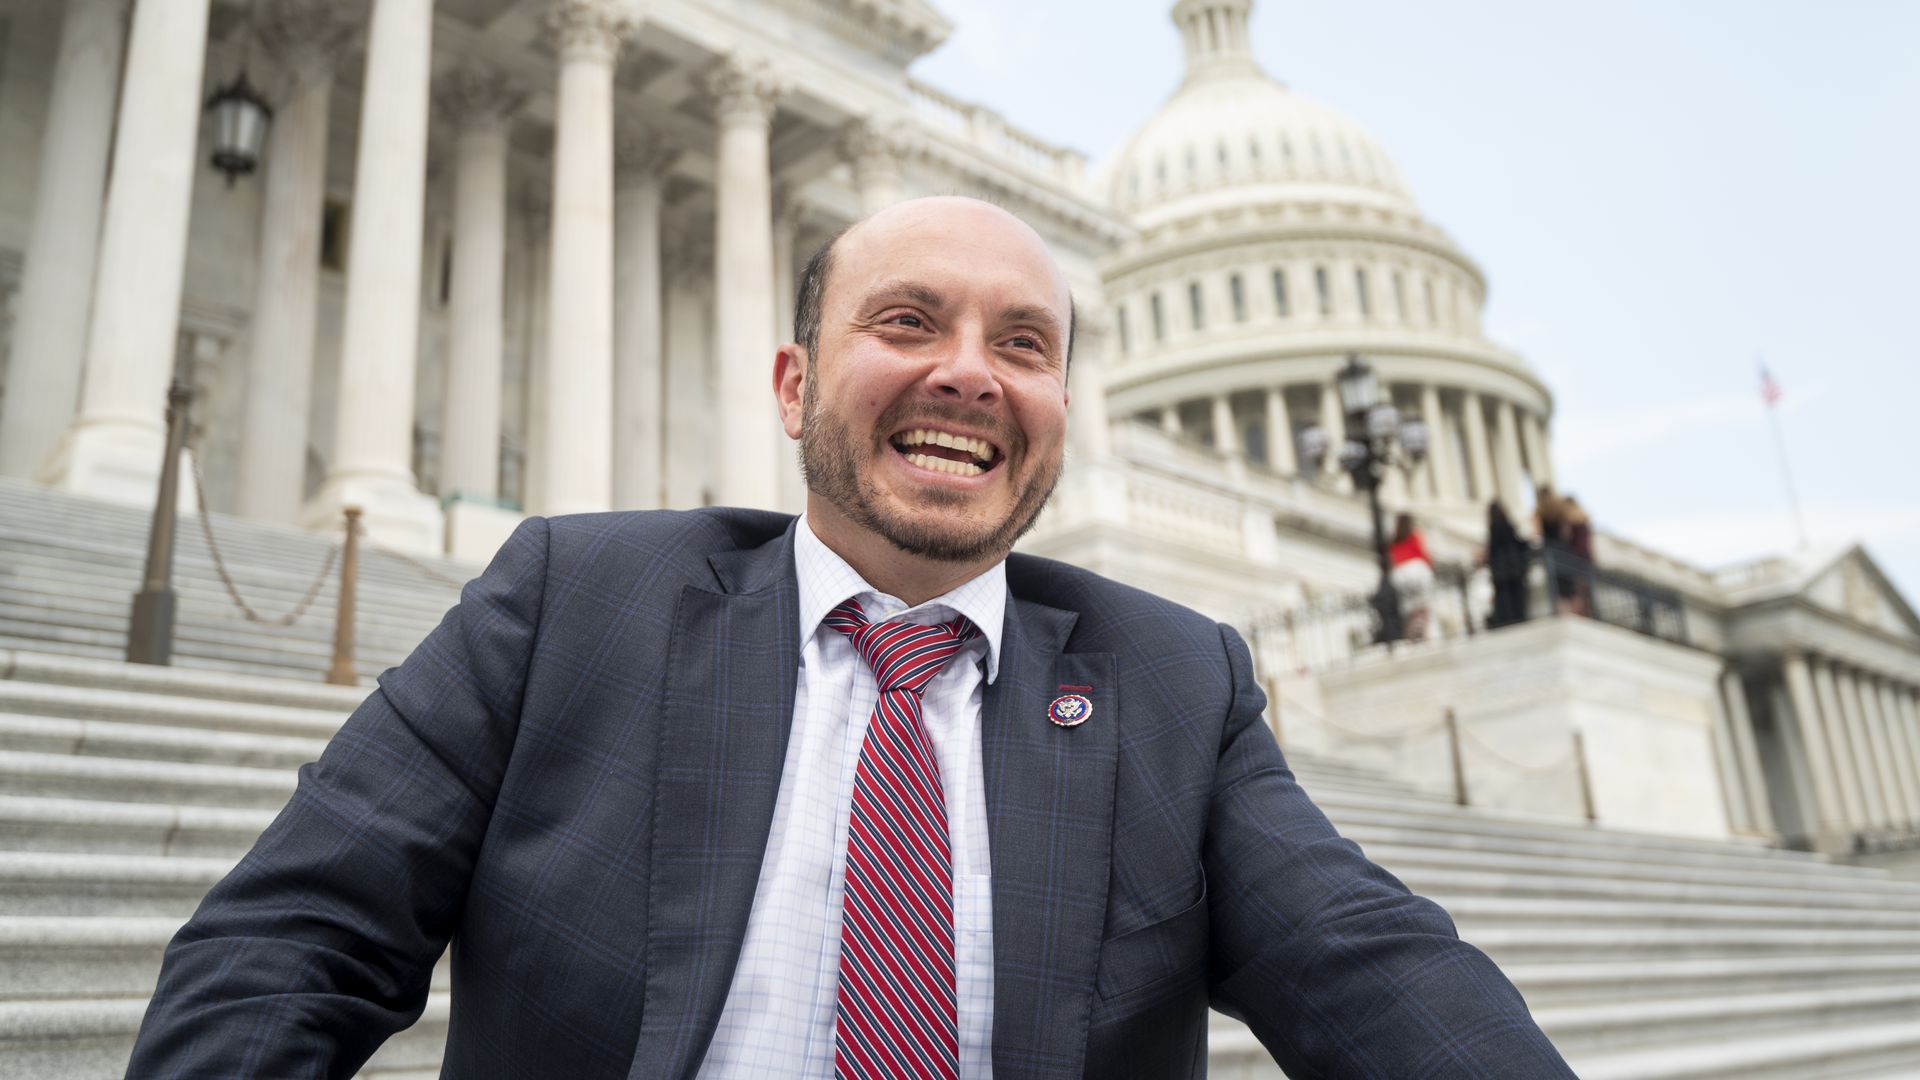 Rep. Andrew Garbarino, wearing a gray suit with a blue grid pattern, a white shirt and a red and blue striped tie, smiles as he sits on the Capitol steps.